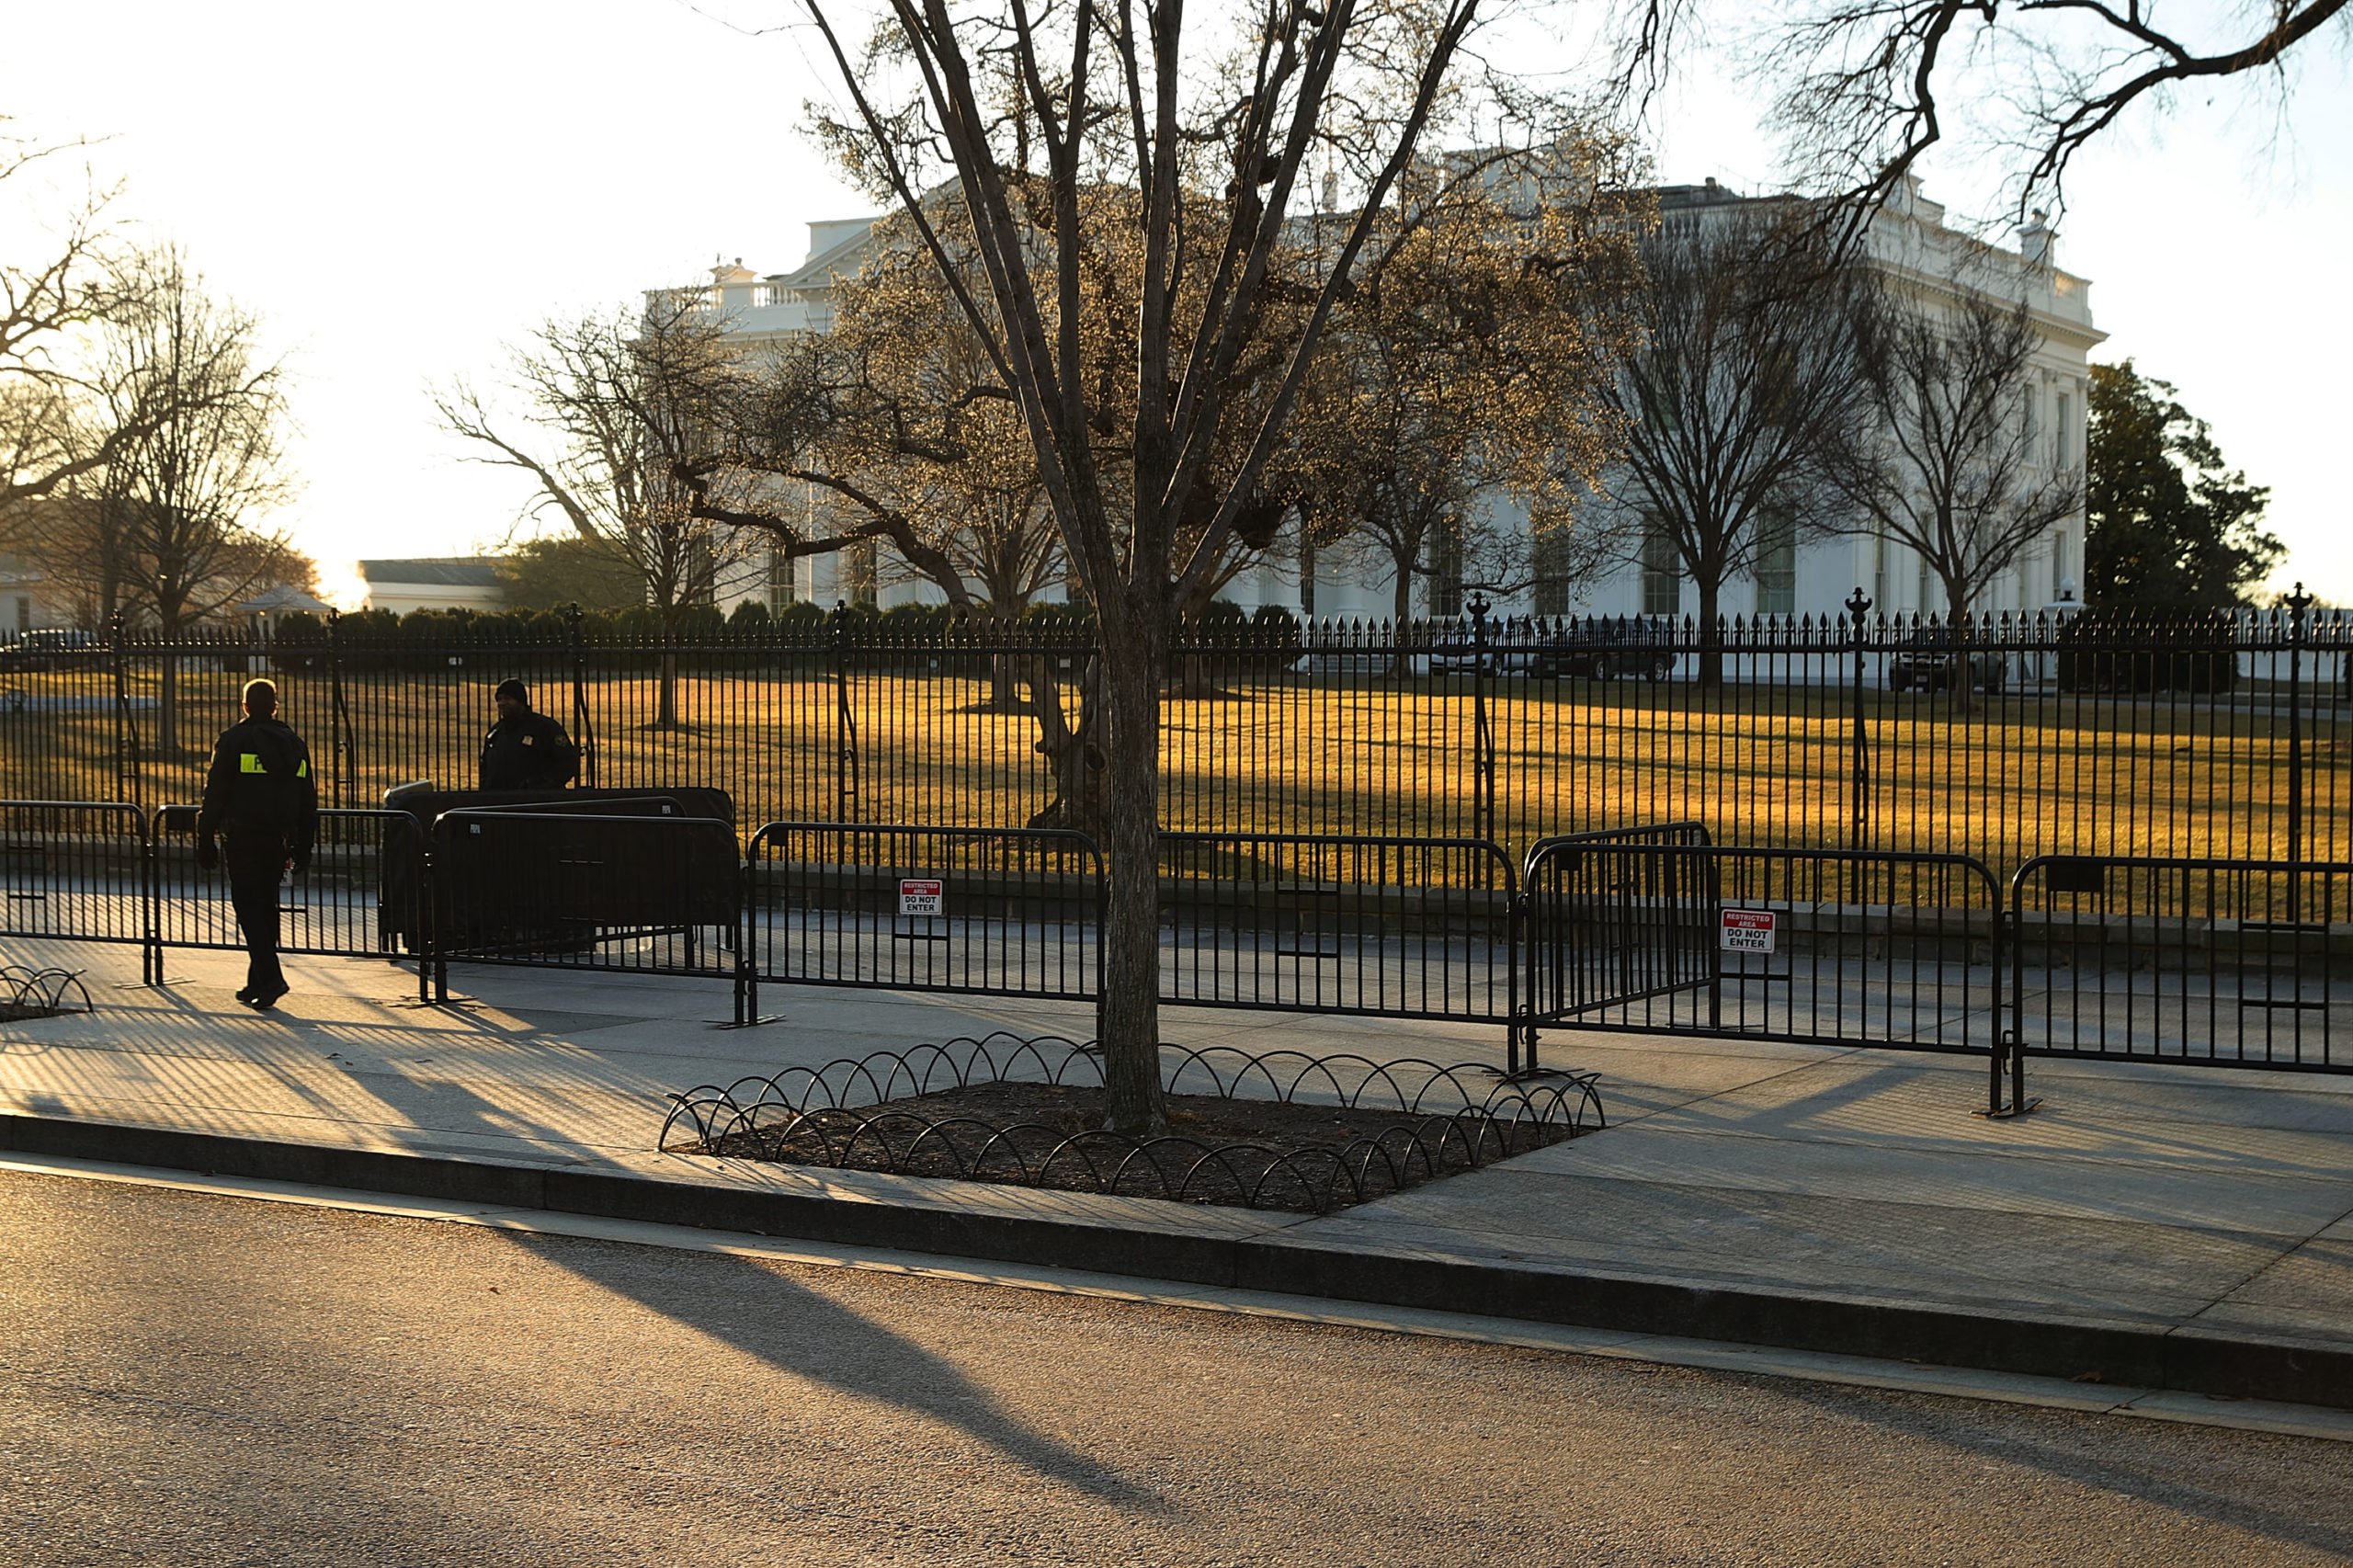 WASHINGTON, DC - JANUARY 20: U.S. Secret Service Uniform Division officers post at barricades on the north side of the White House January 20, 2018 in Washington, DC. The federal government was partially shut down at midnight after Republicans and Democrats in the Senate failed to find common ground on a budget. (Photo by Chip Somodevilla/Getty Images)